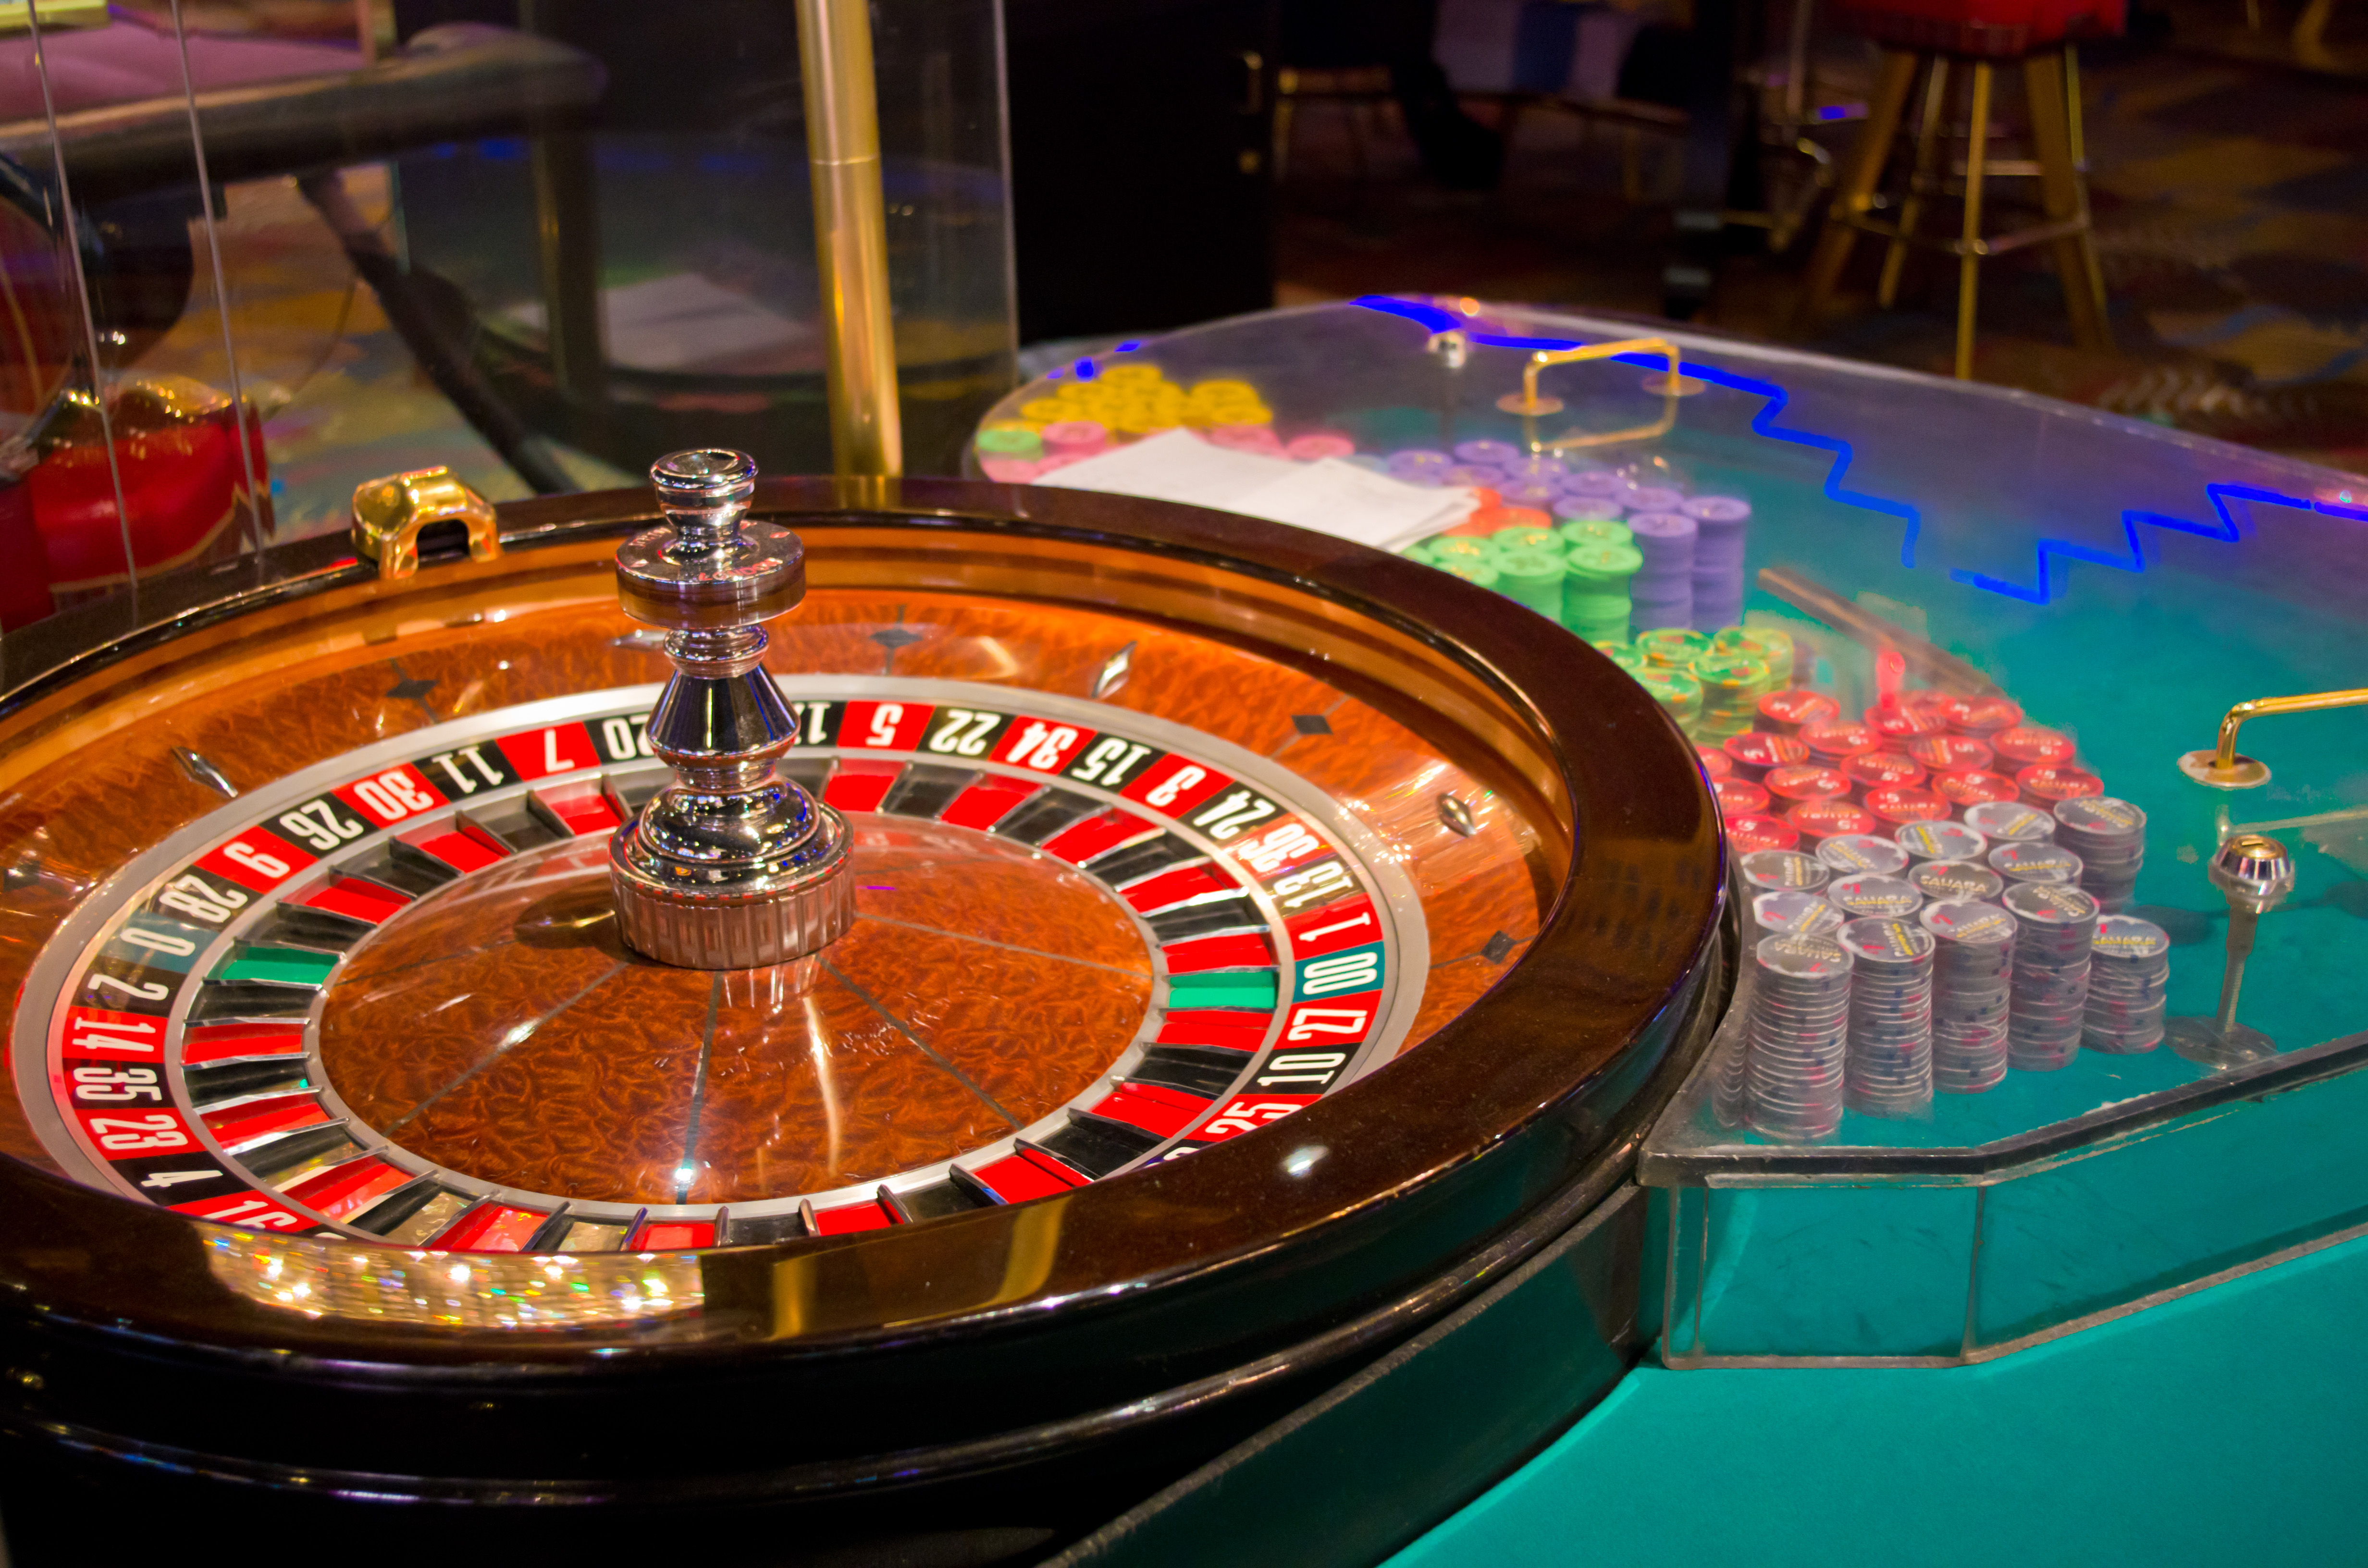 1. Exploring New Horizons with Innovative Casino Gaming Experiences